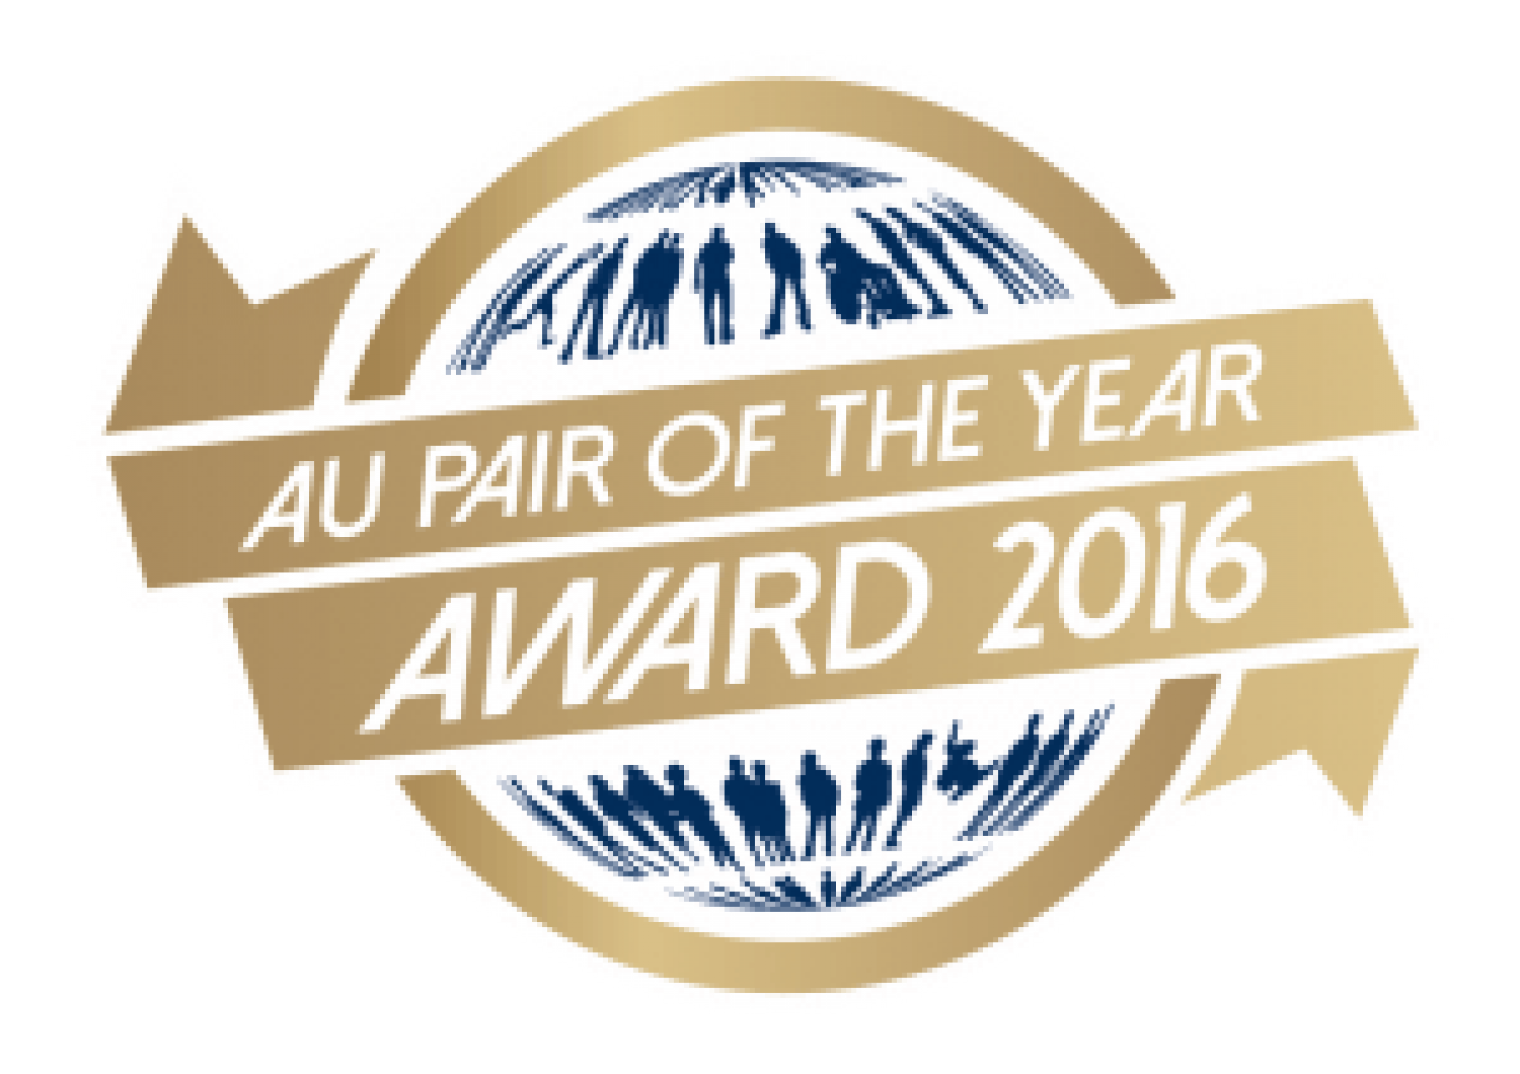 IAPA Au Pair of the Year Award 2016. Last chance to participate